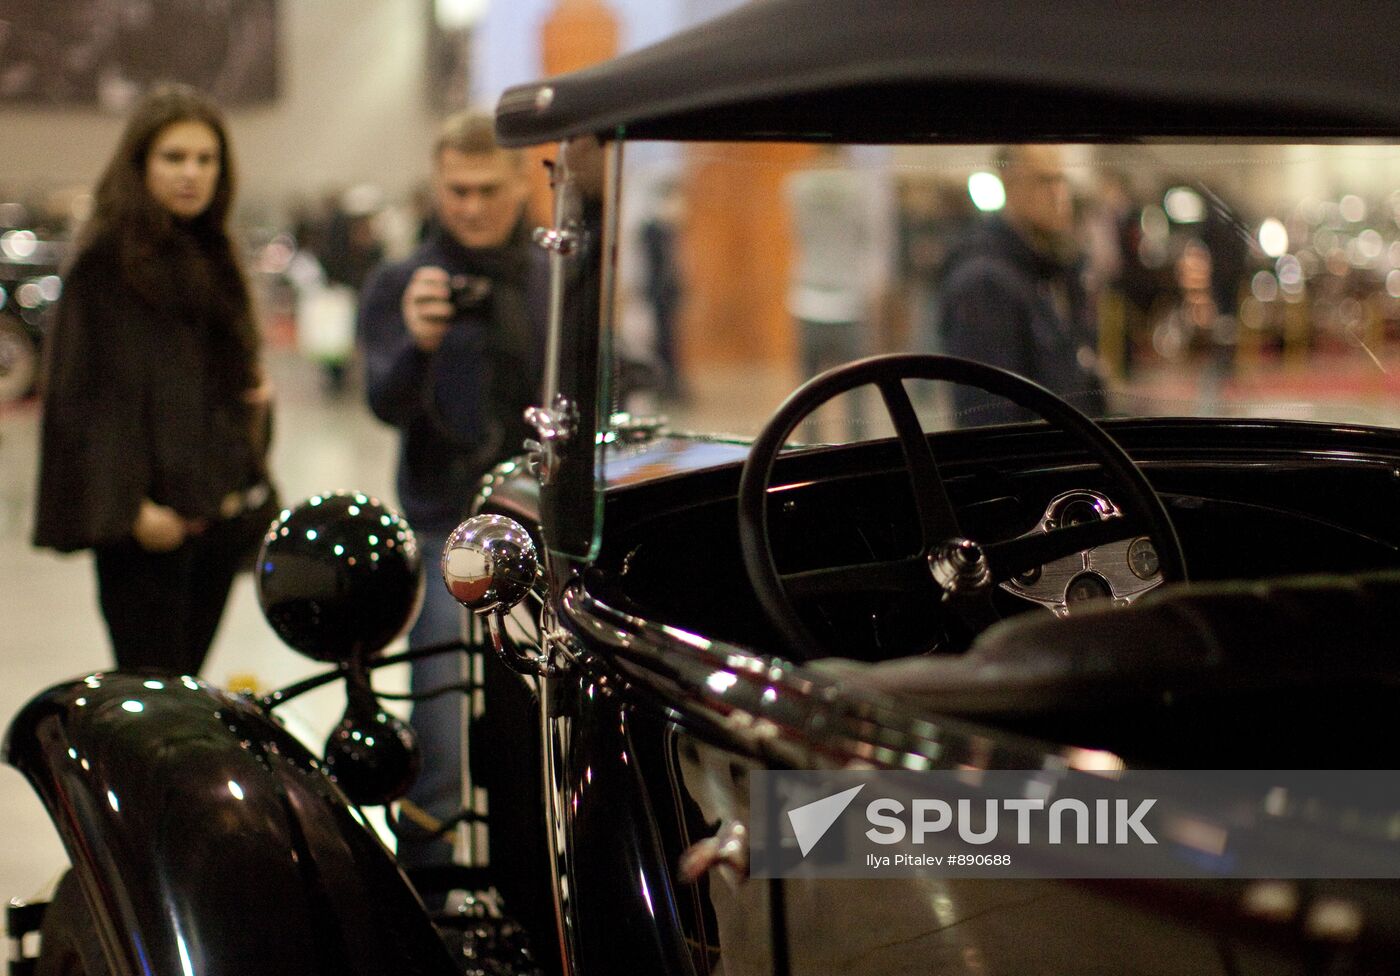 Oldtimer Gallery exhibition opens in Moscow